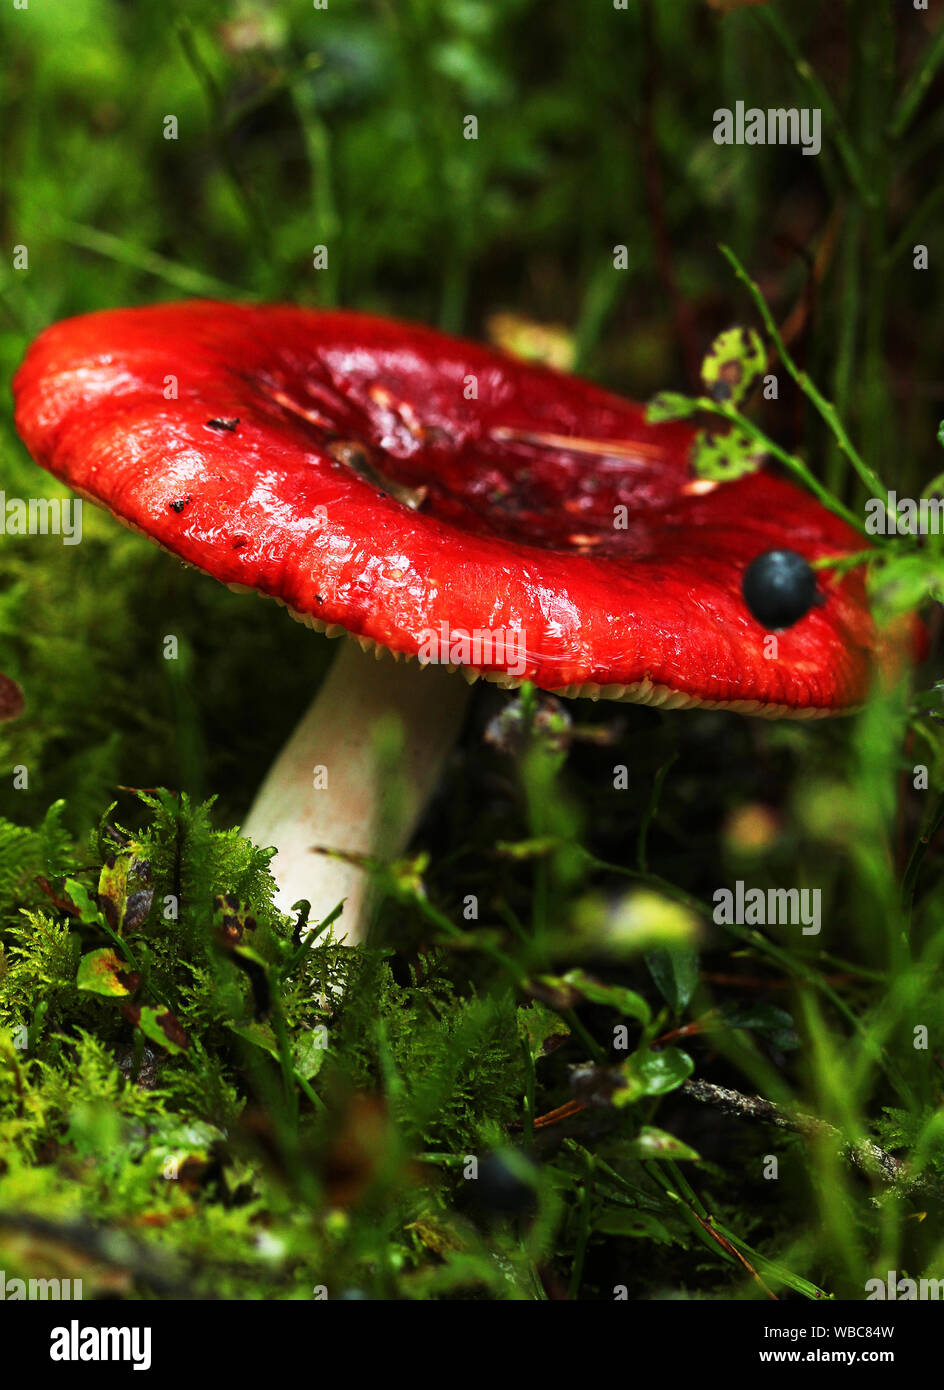 edible white mushroom with orange cap on bright green mossy forest floor. Stock Photo